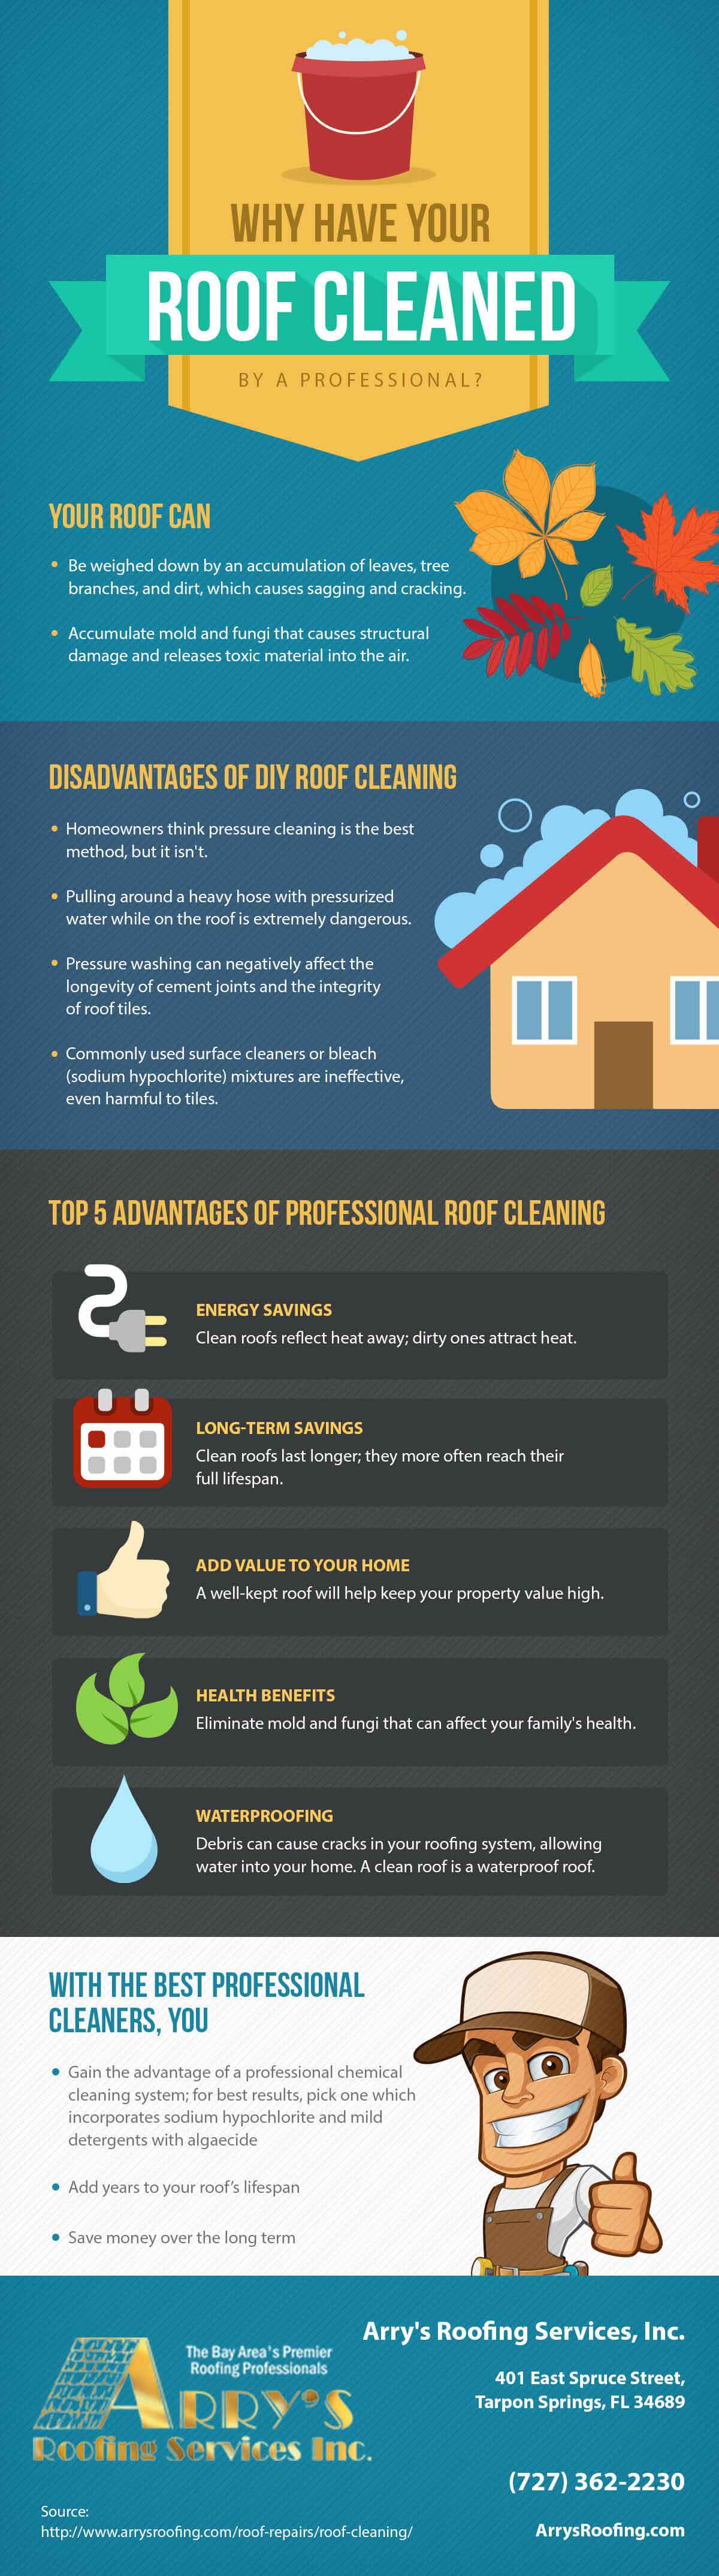 Why Have Your Roof Cleaned By A Professional